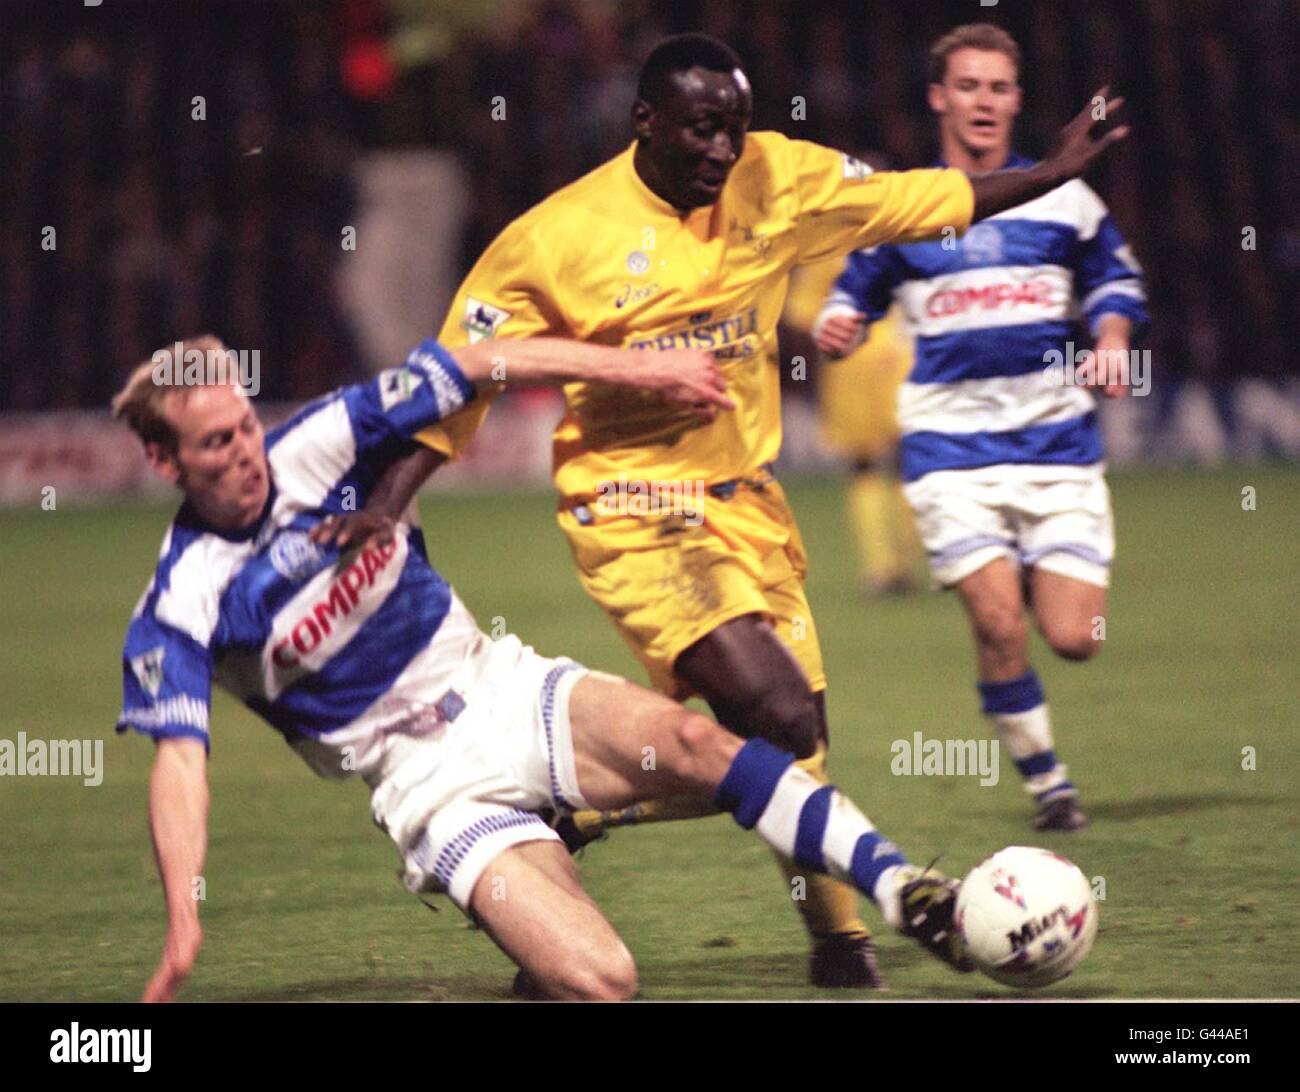 https://c8.alamy.com/comp/G44AE1/leeds-strikertony-yeboah-survives-a-tackle-from-karl-ready-of-queens-G44AE1.jpg